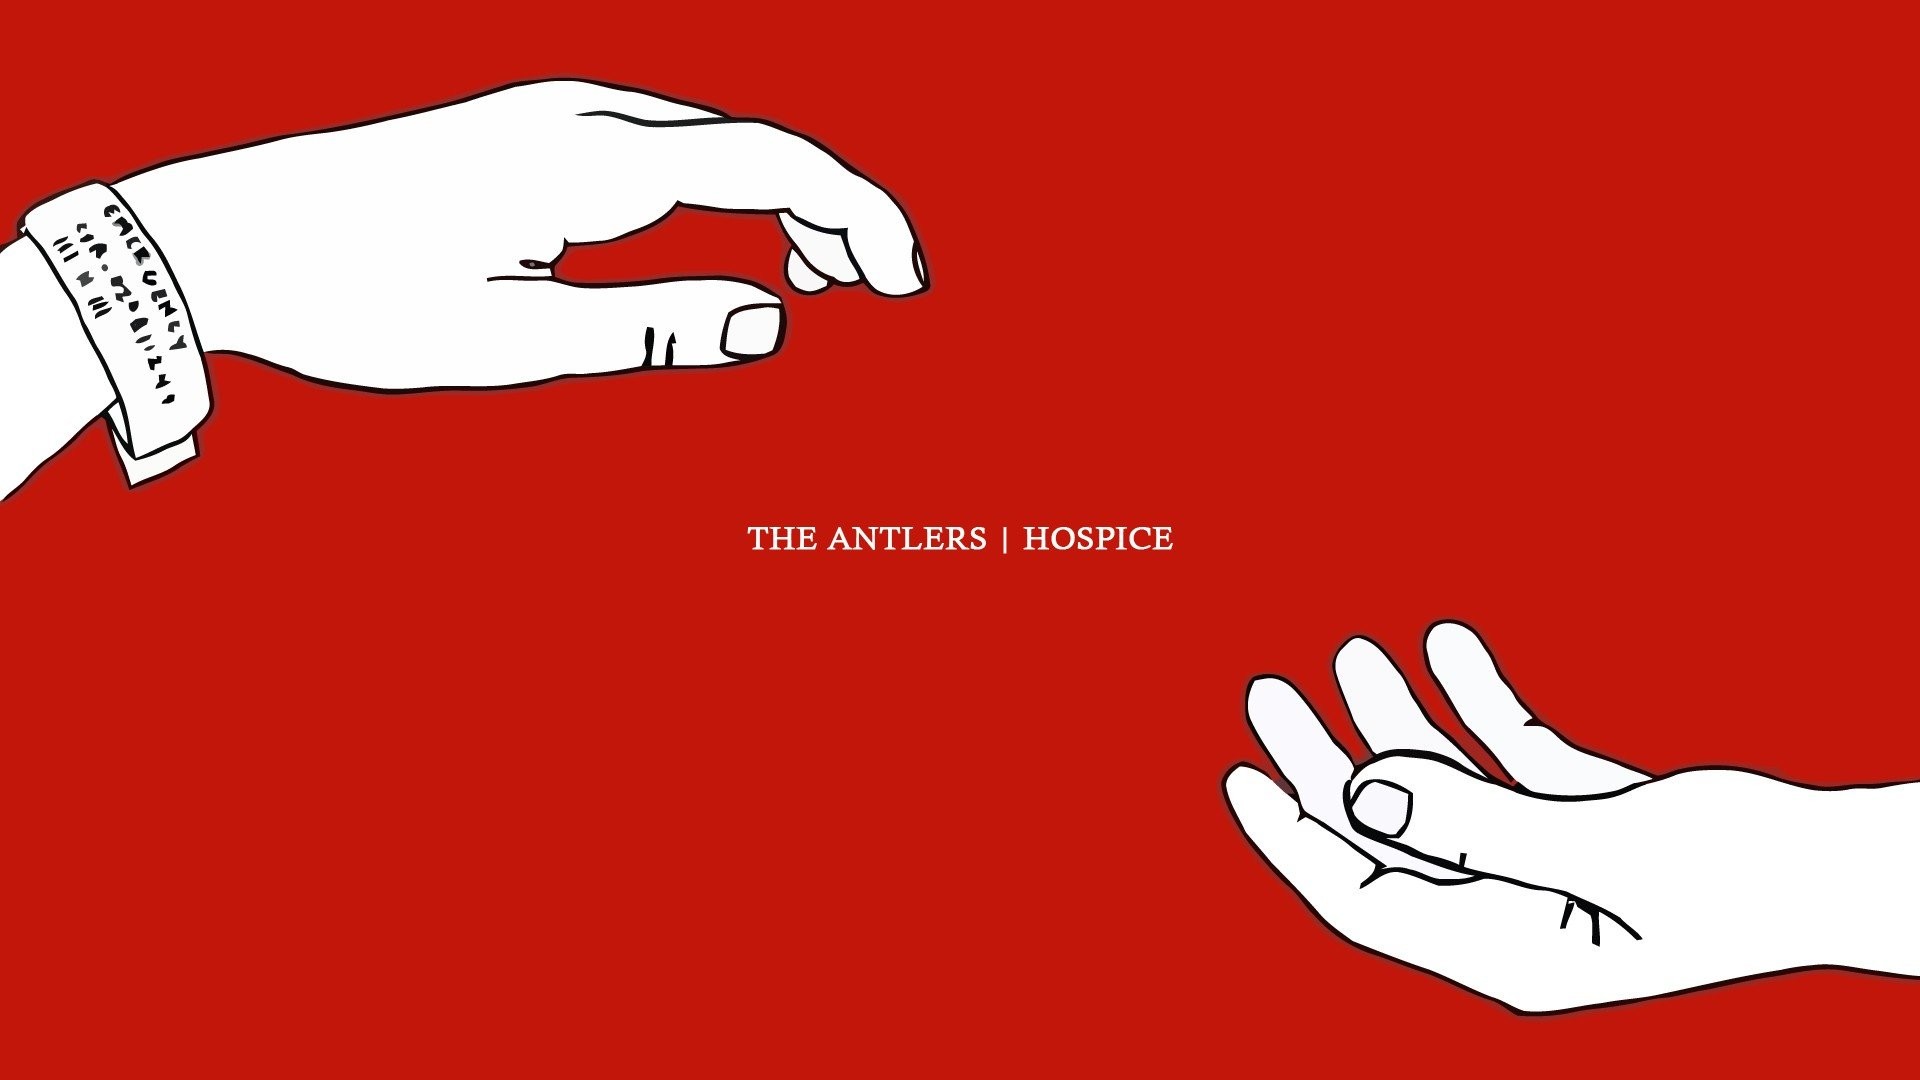 1920x1080 Rocks The Antlers indie simple background Hospice wallpaper |  |  243204 | WallpaperUP